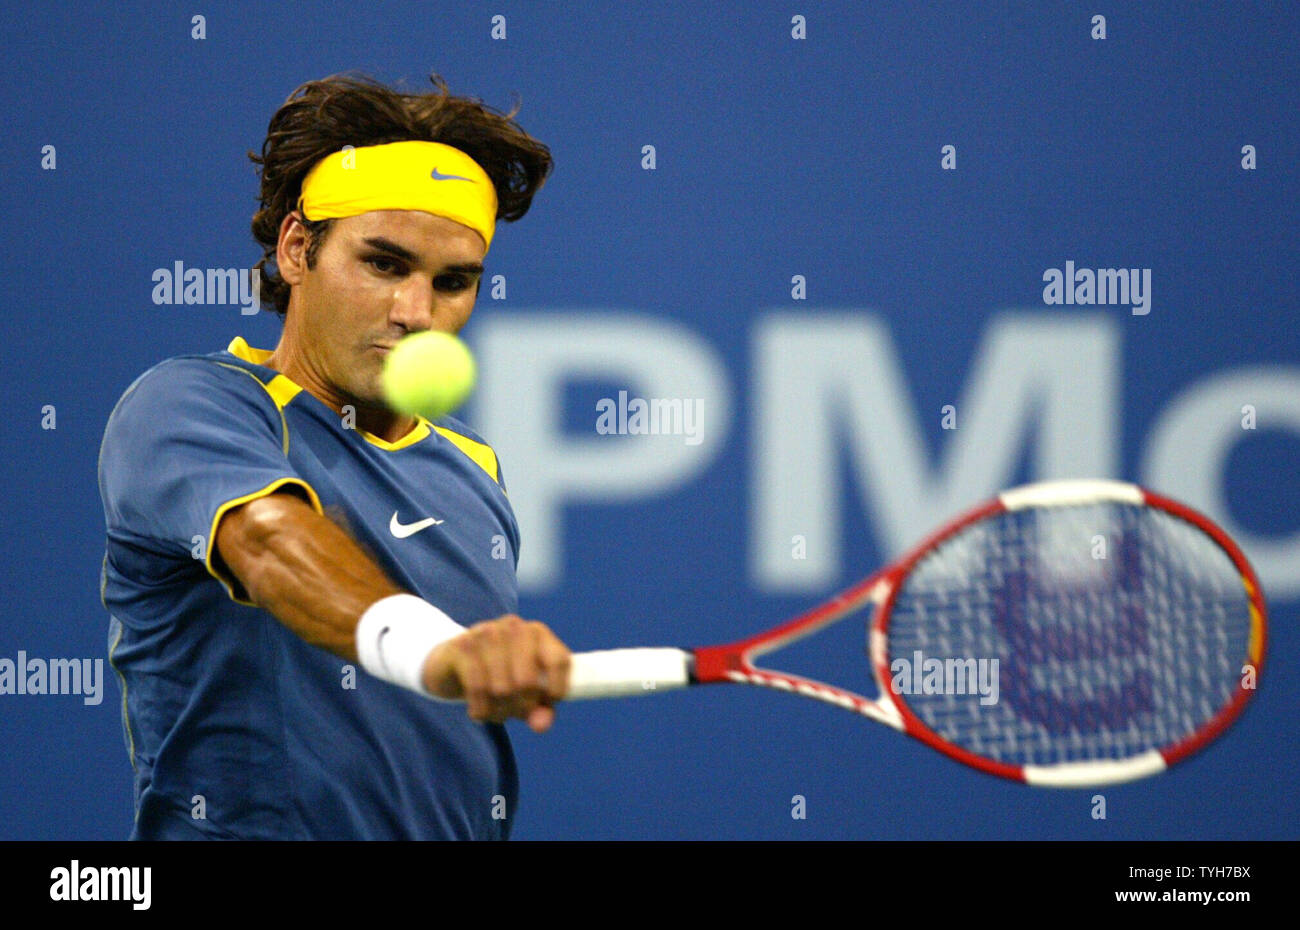 Roger Federer (SUI) hits a backhand in his match against Olivier Rochus  (BEL) during night 7 at the US Open in Flushing Meadows, New York on  September 4, 2005. (UPI Photo/John Angelillo